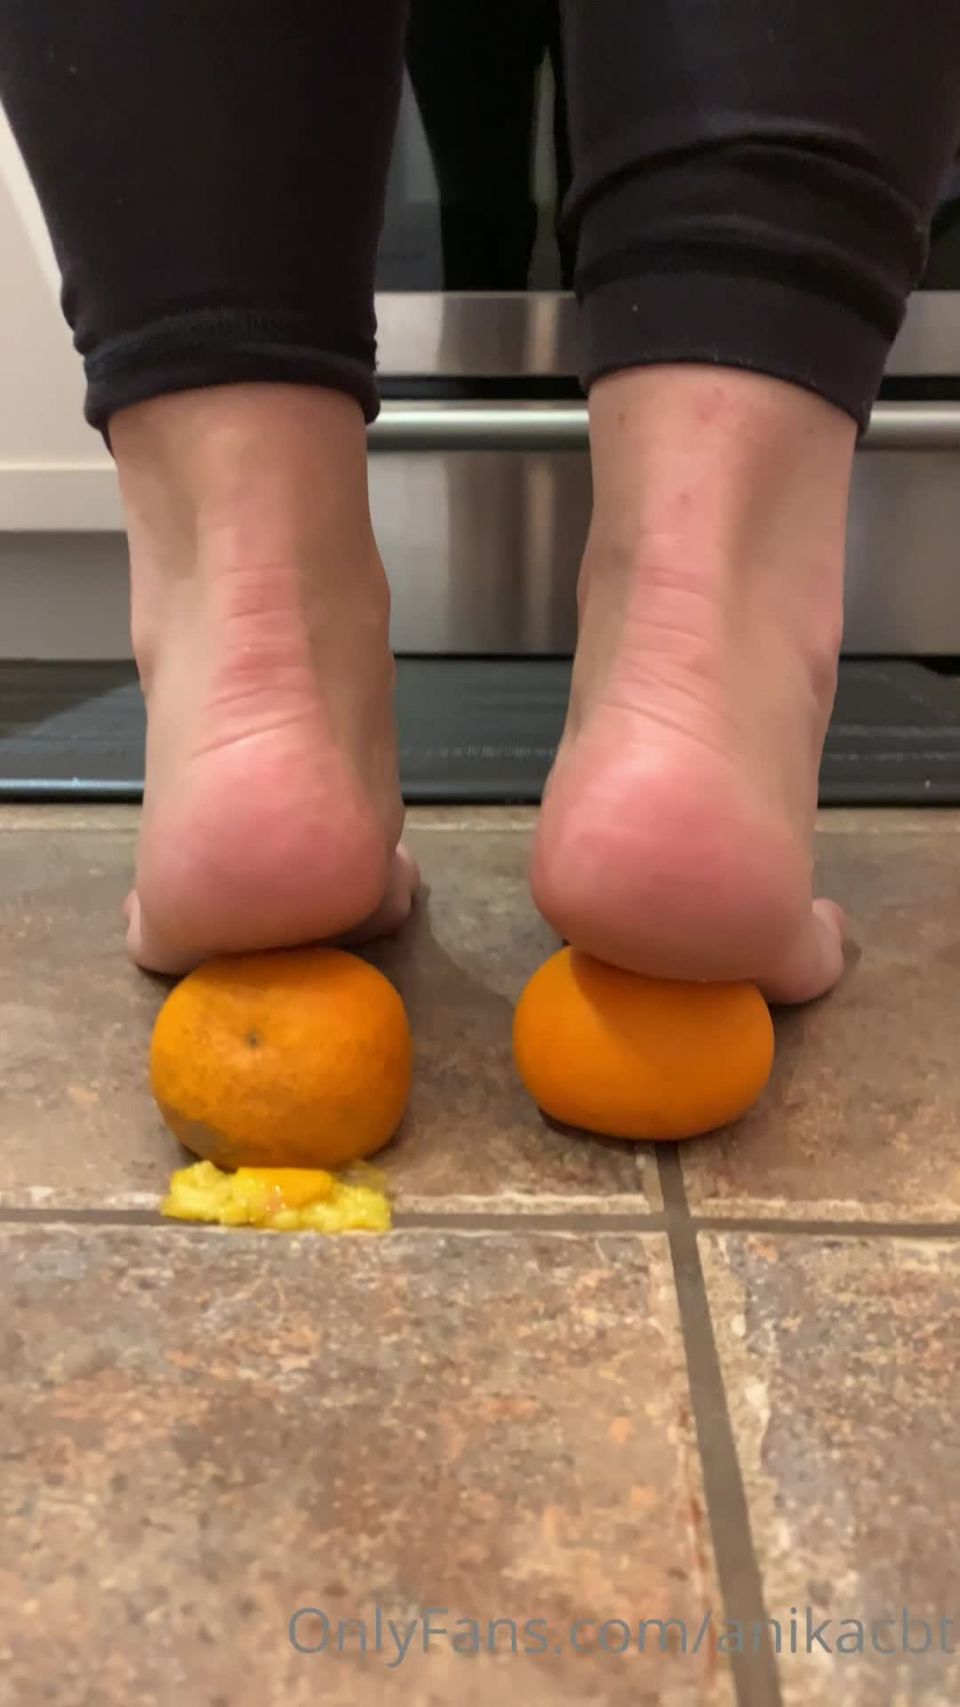 Onlyfans - Goddess Anika - anikacbt - anikacbtHere I am making some orange juice for you this am in my kitchen with my beautiful feet - 02-10-2020